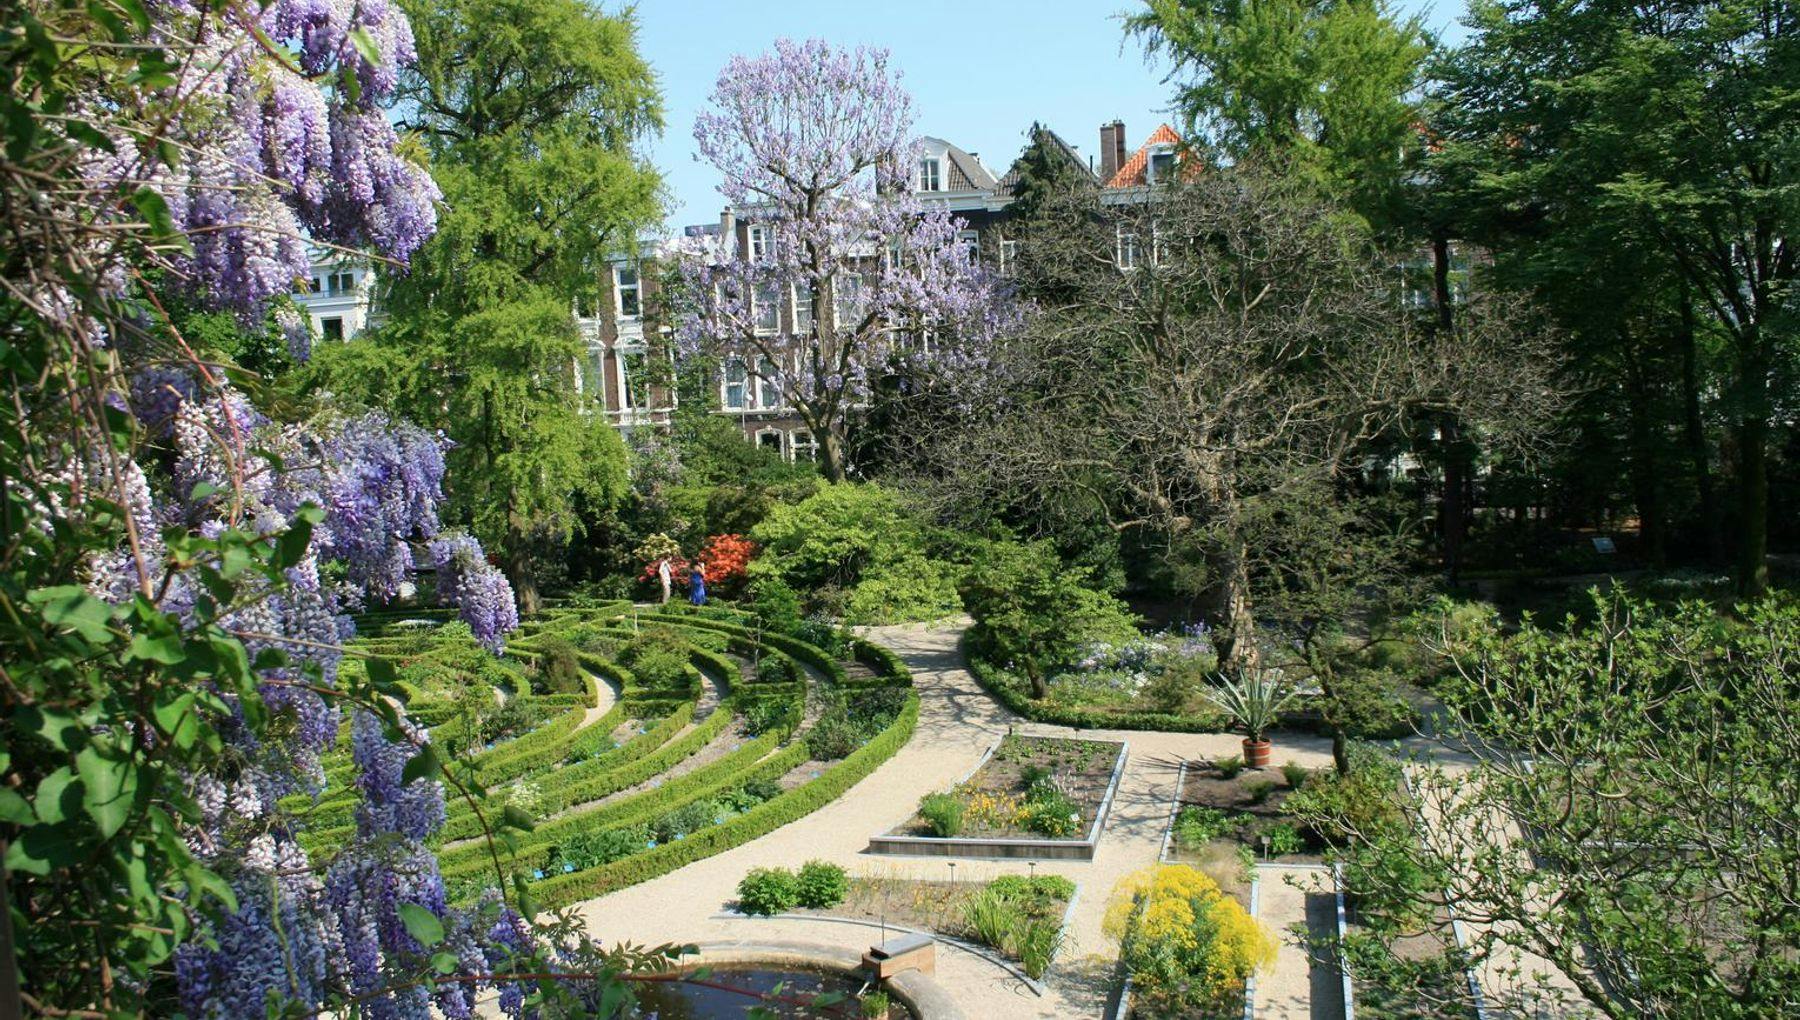 This image can also be used for general promotion of Amsterdam, provided that the name Hortus Botanicus will be mentioned under the image.